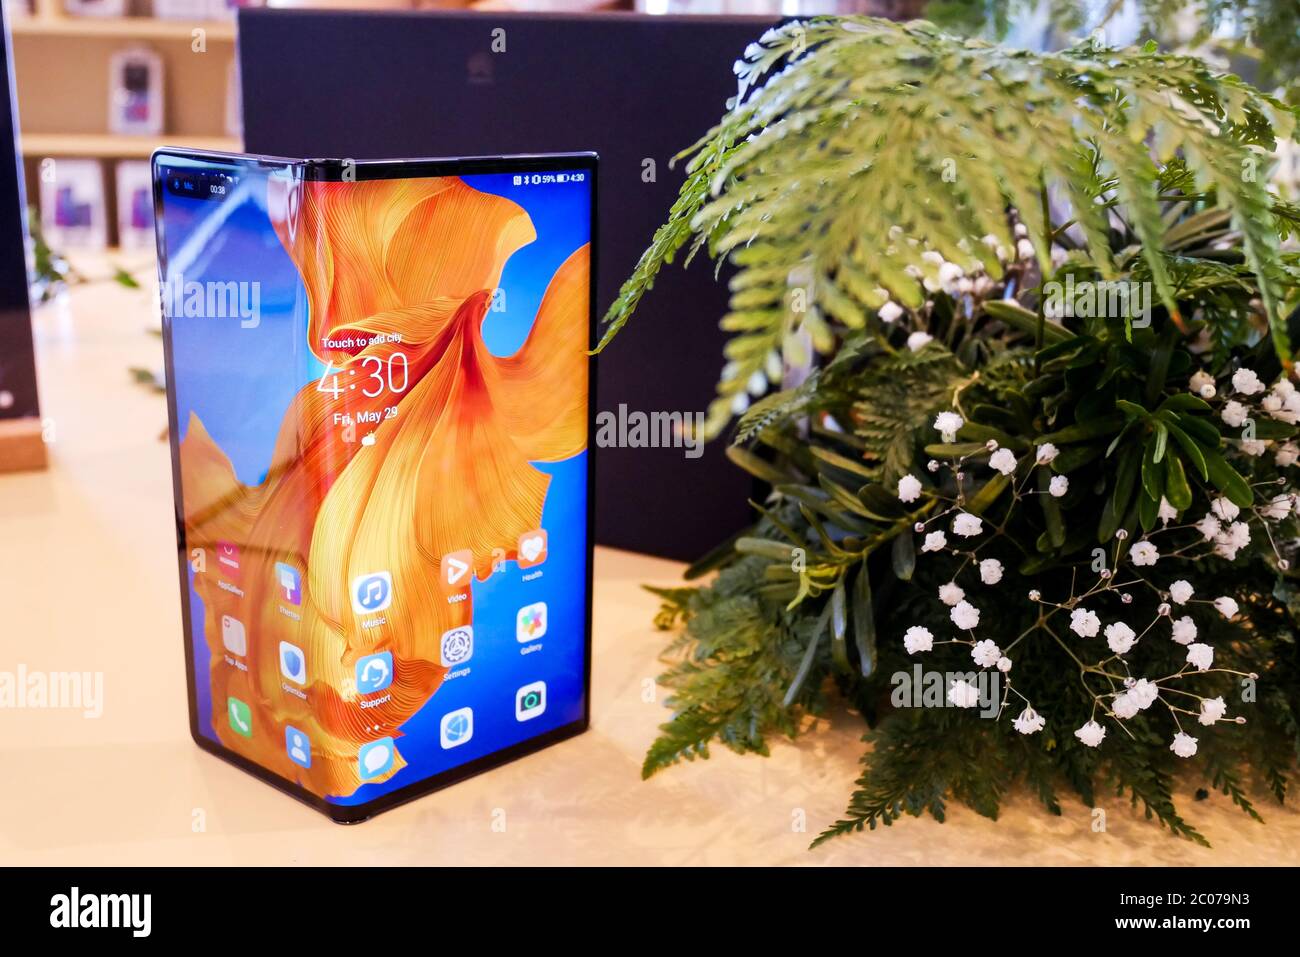 Bangkok, Thailand - JUNE 4, 2020: Huawei Mate XS has been unveiled in Thailand, an Android-based high end foldable smartphone produced by Huawei, it i Stock Photo